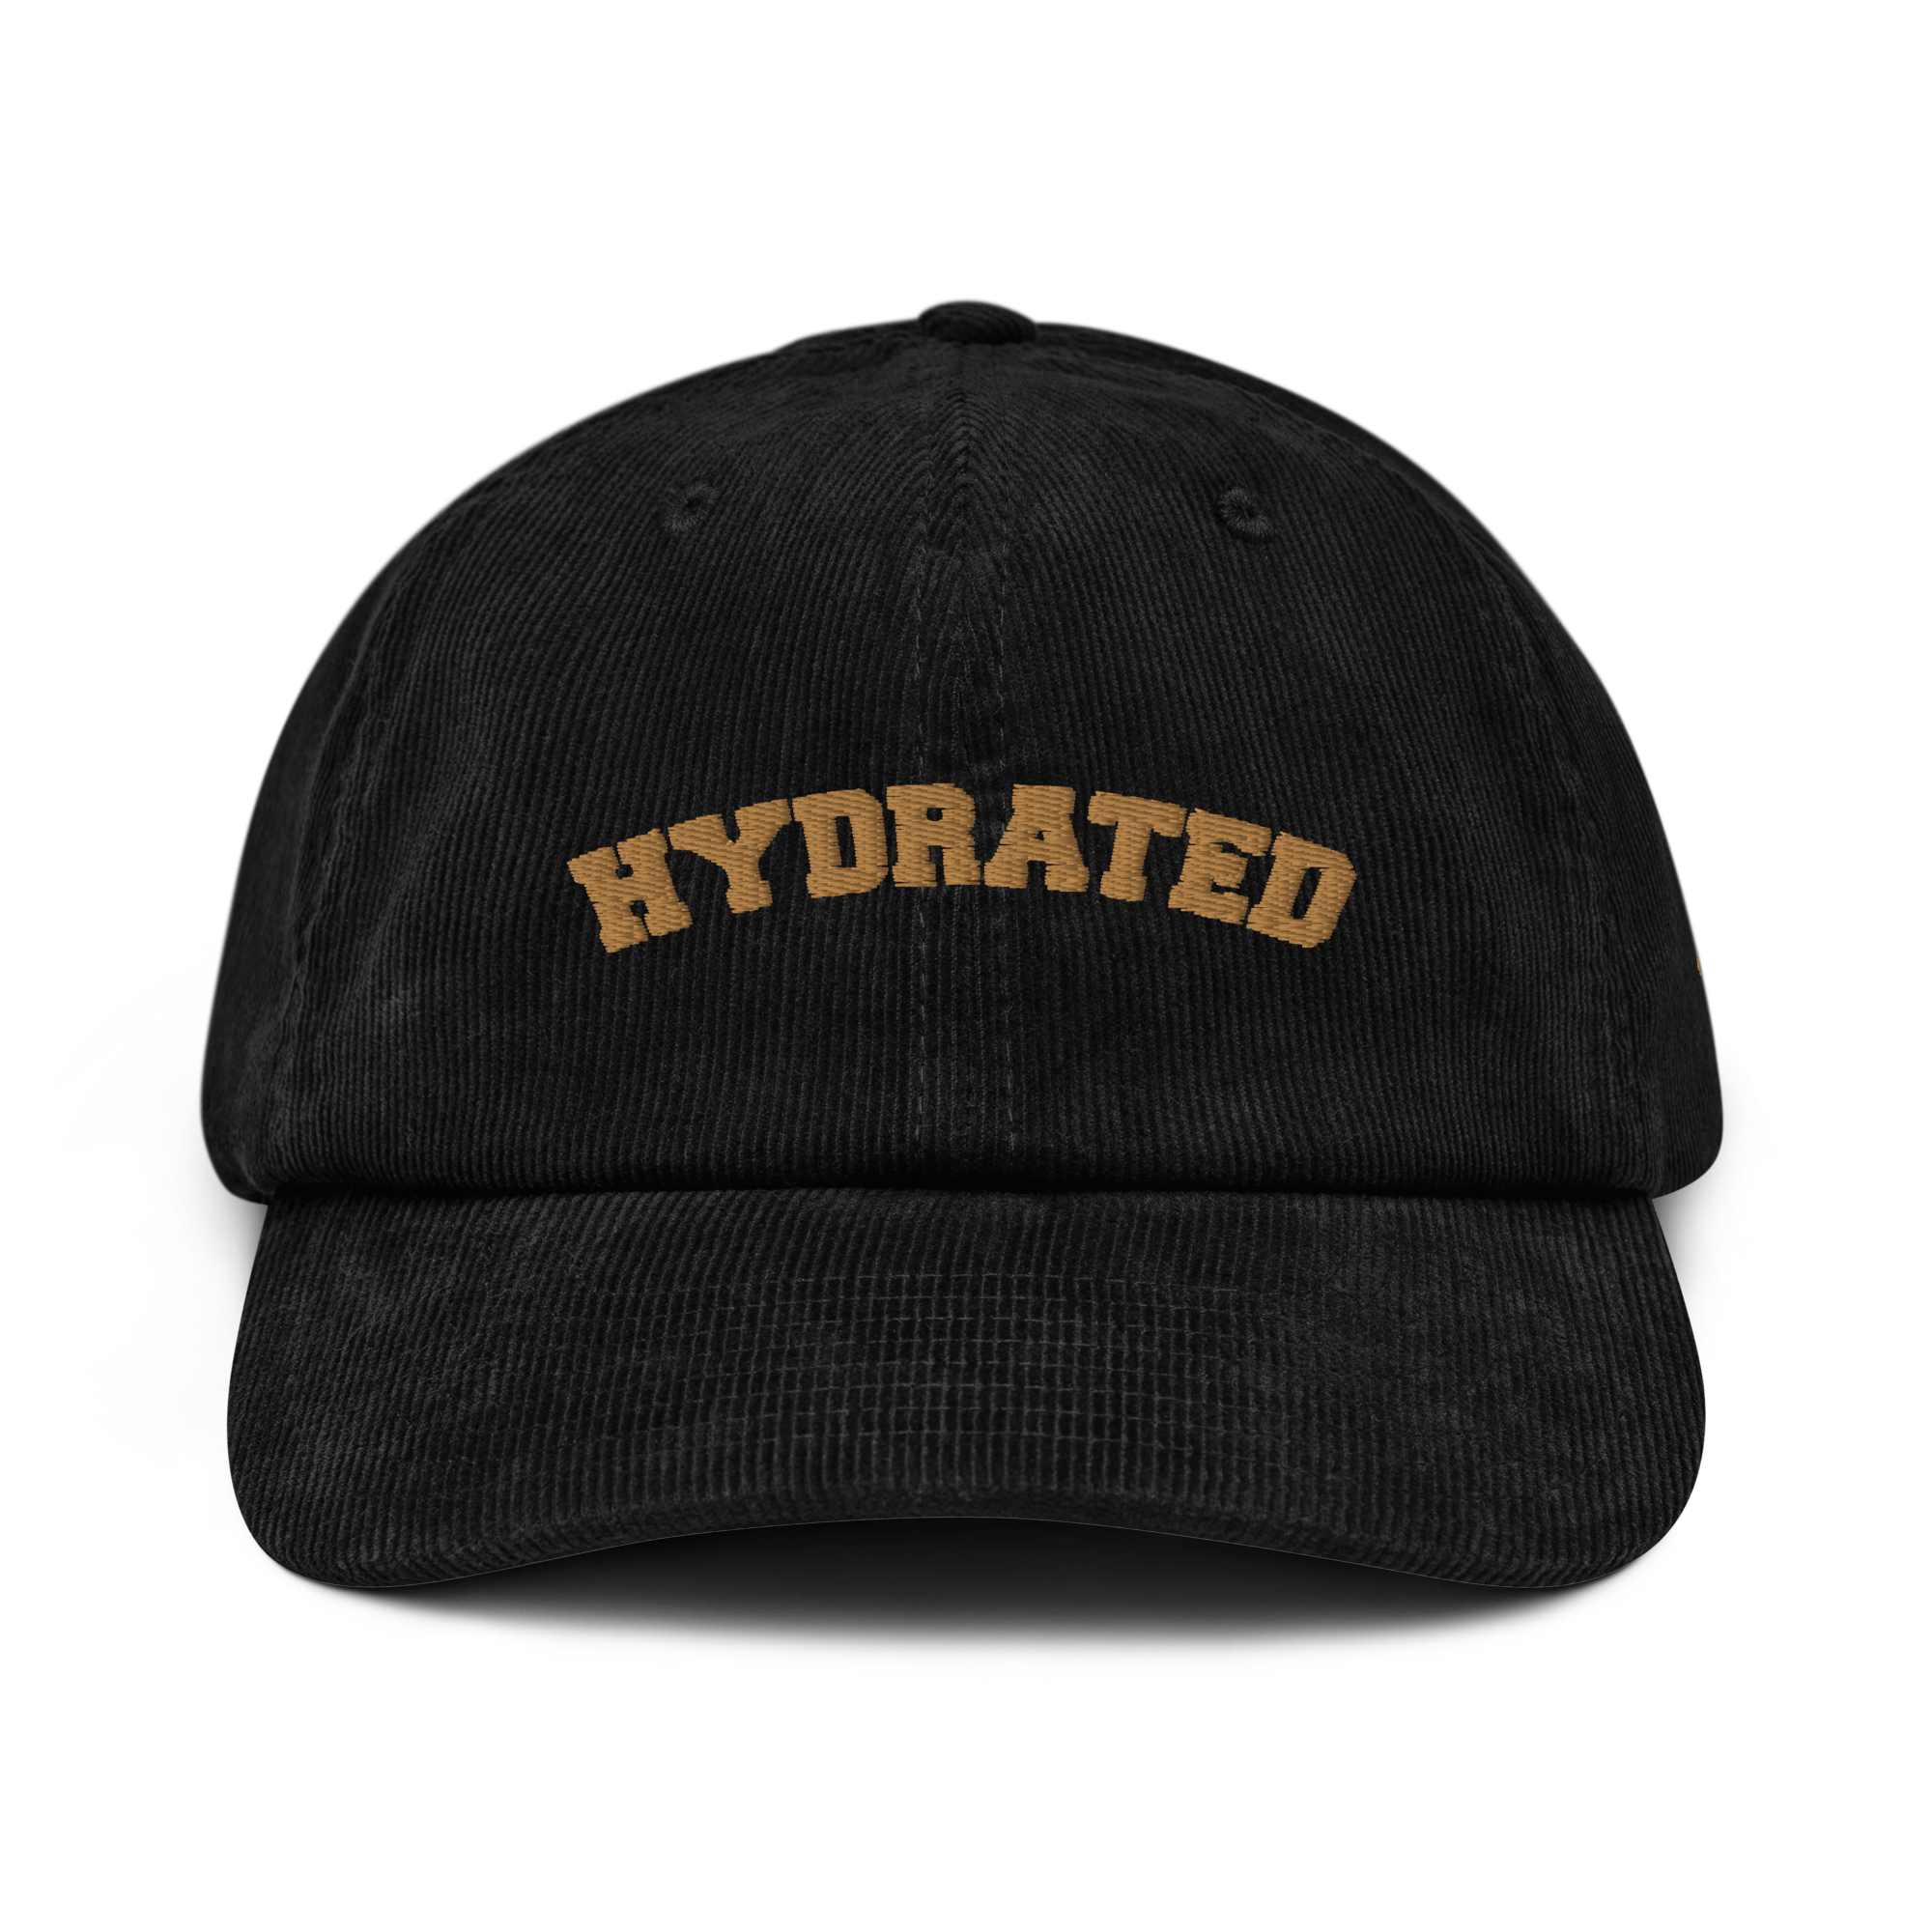 Hydrated hat